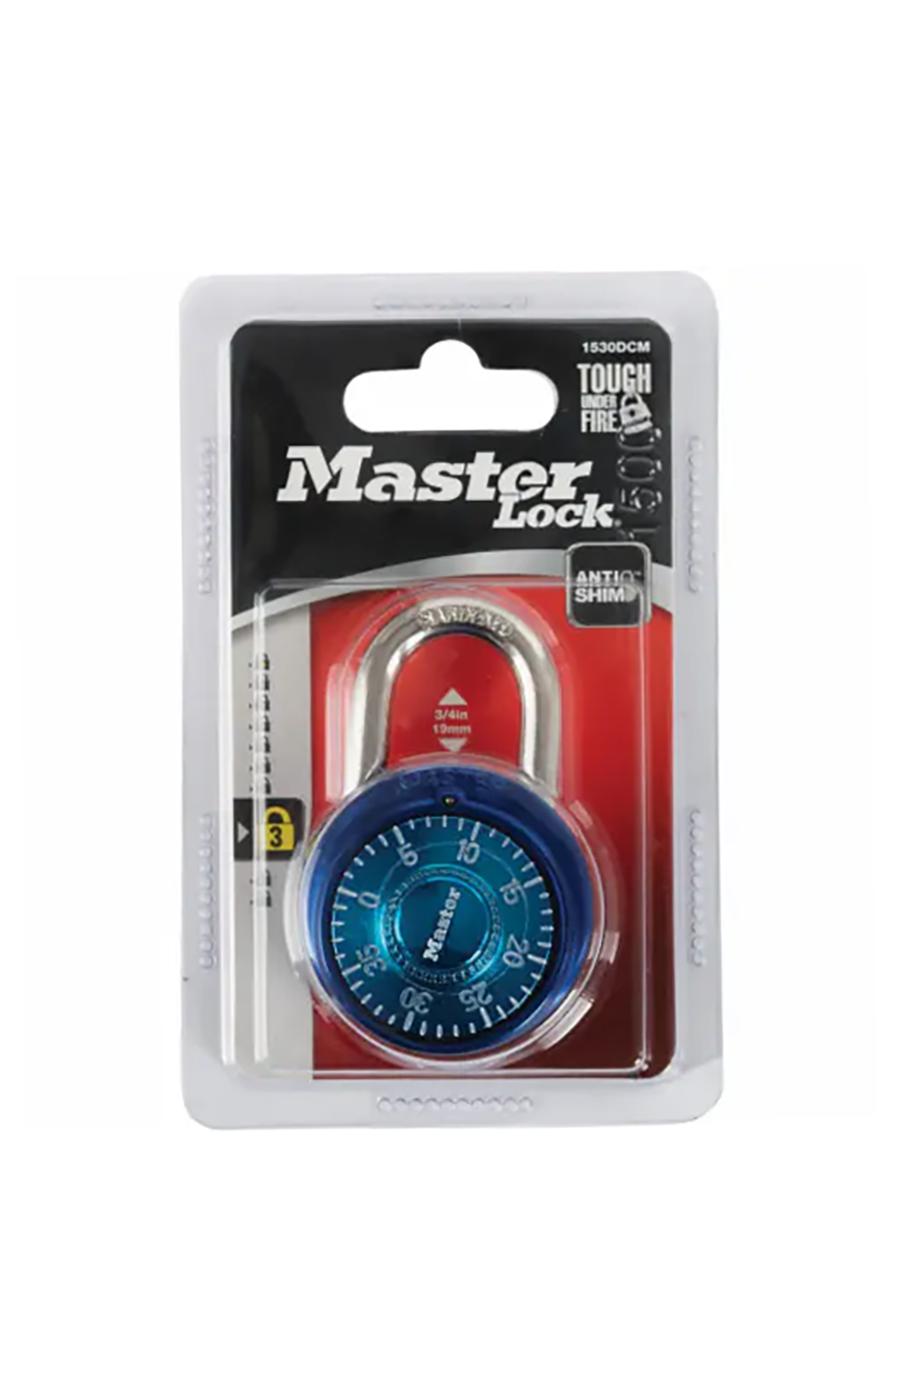 Master Lock 1530DCM Combination Lock - Assorted Colors; image 3 of 3